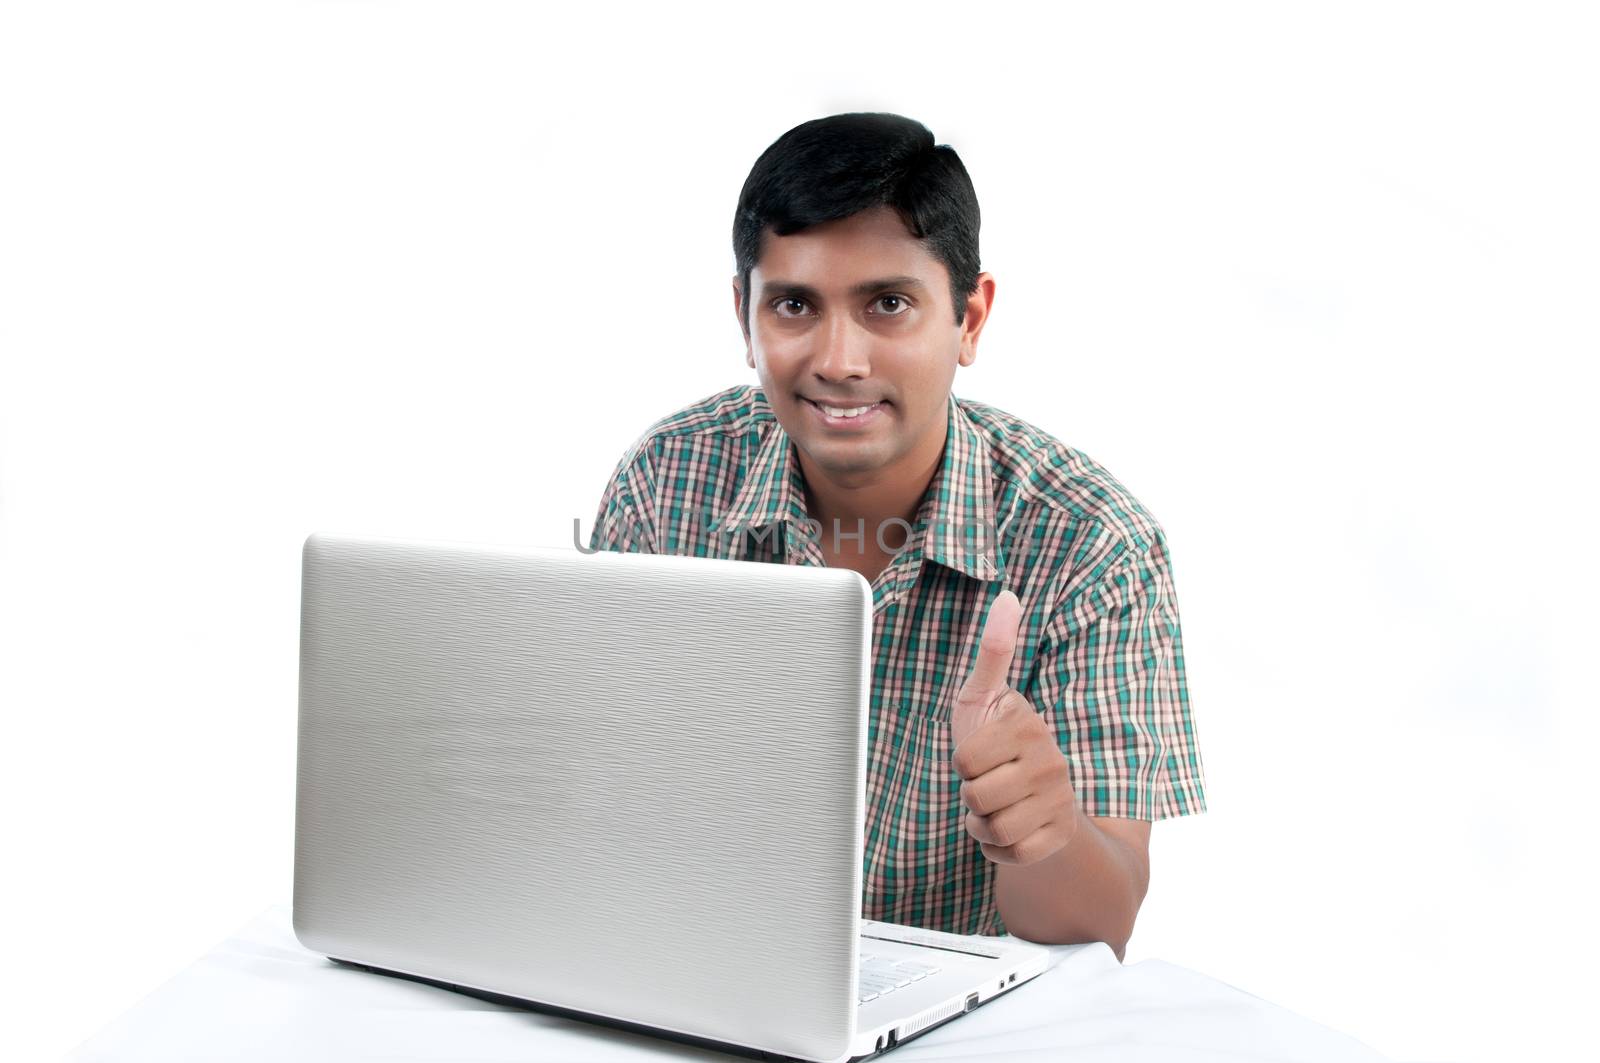 an old Indian man surfing the net after retirement